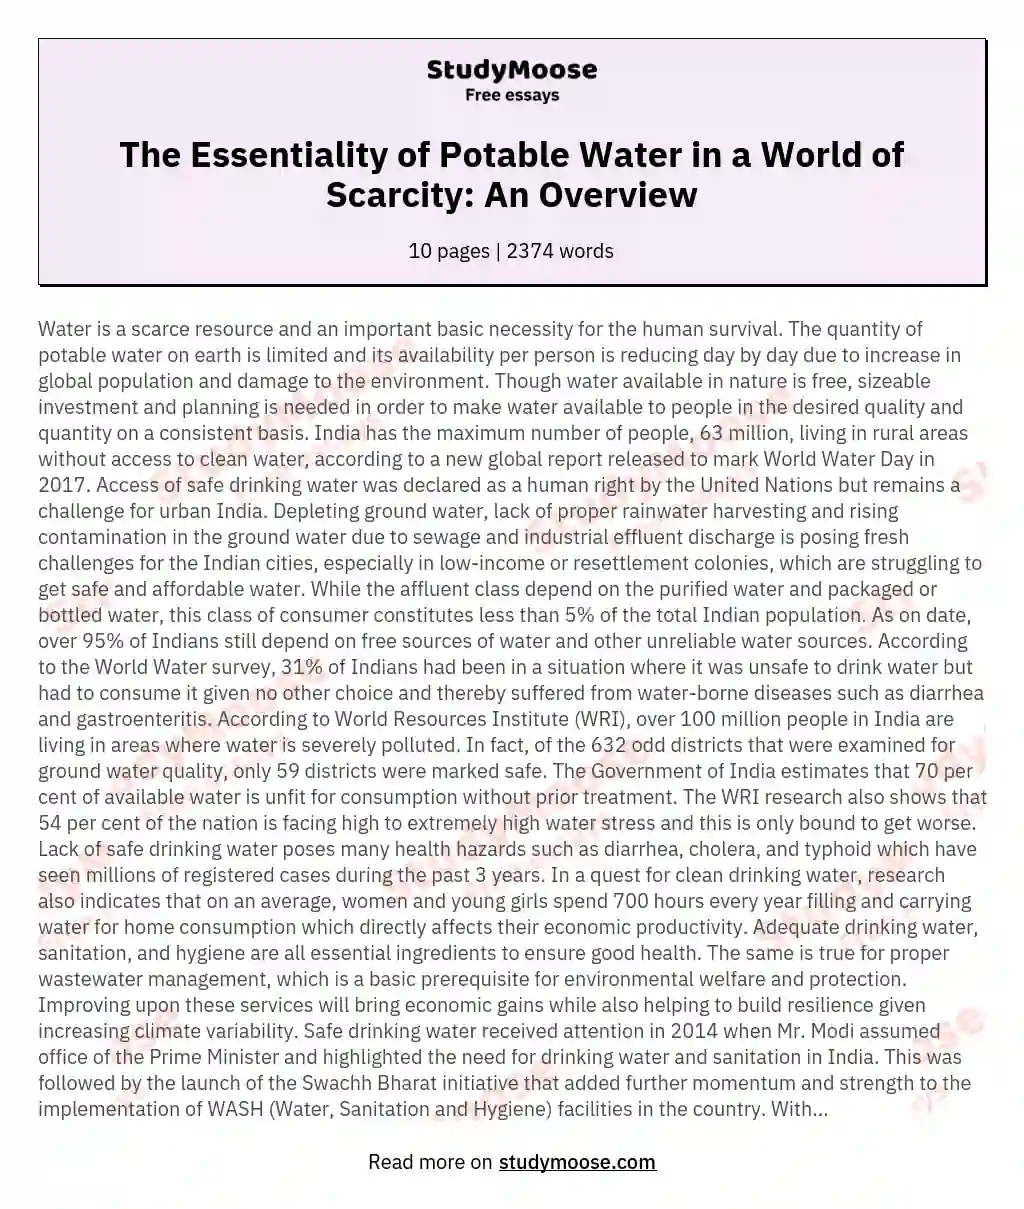 The Essentiality of Potable Water in a World of Scarcity: An Overview essay